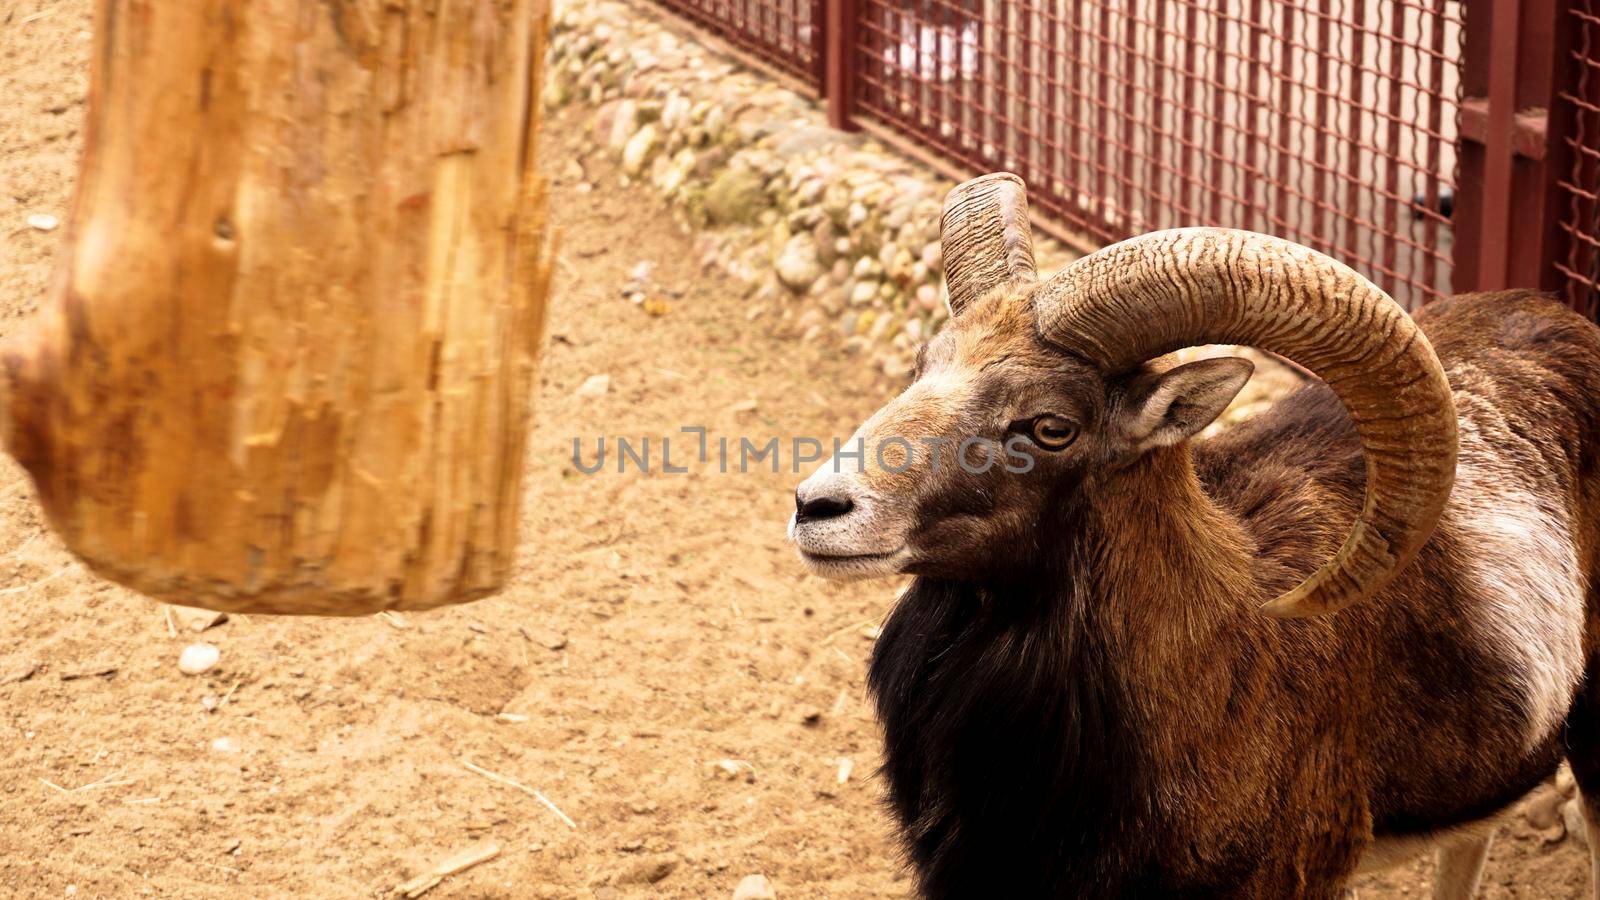 The mouflon scratches its horns against a wooden post. by natali_brill